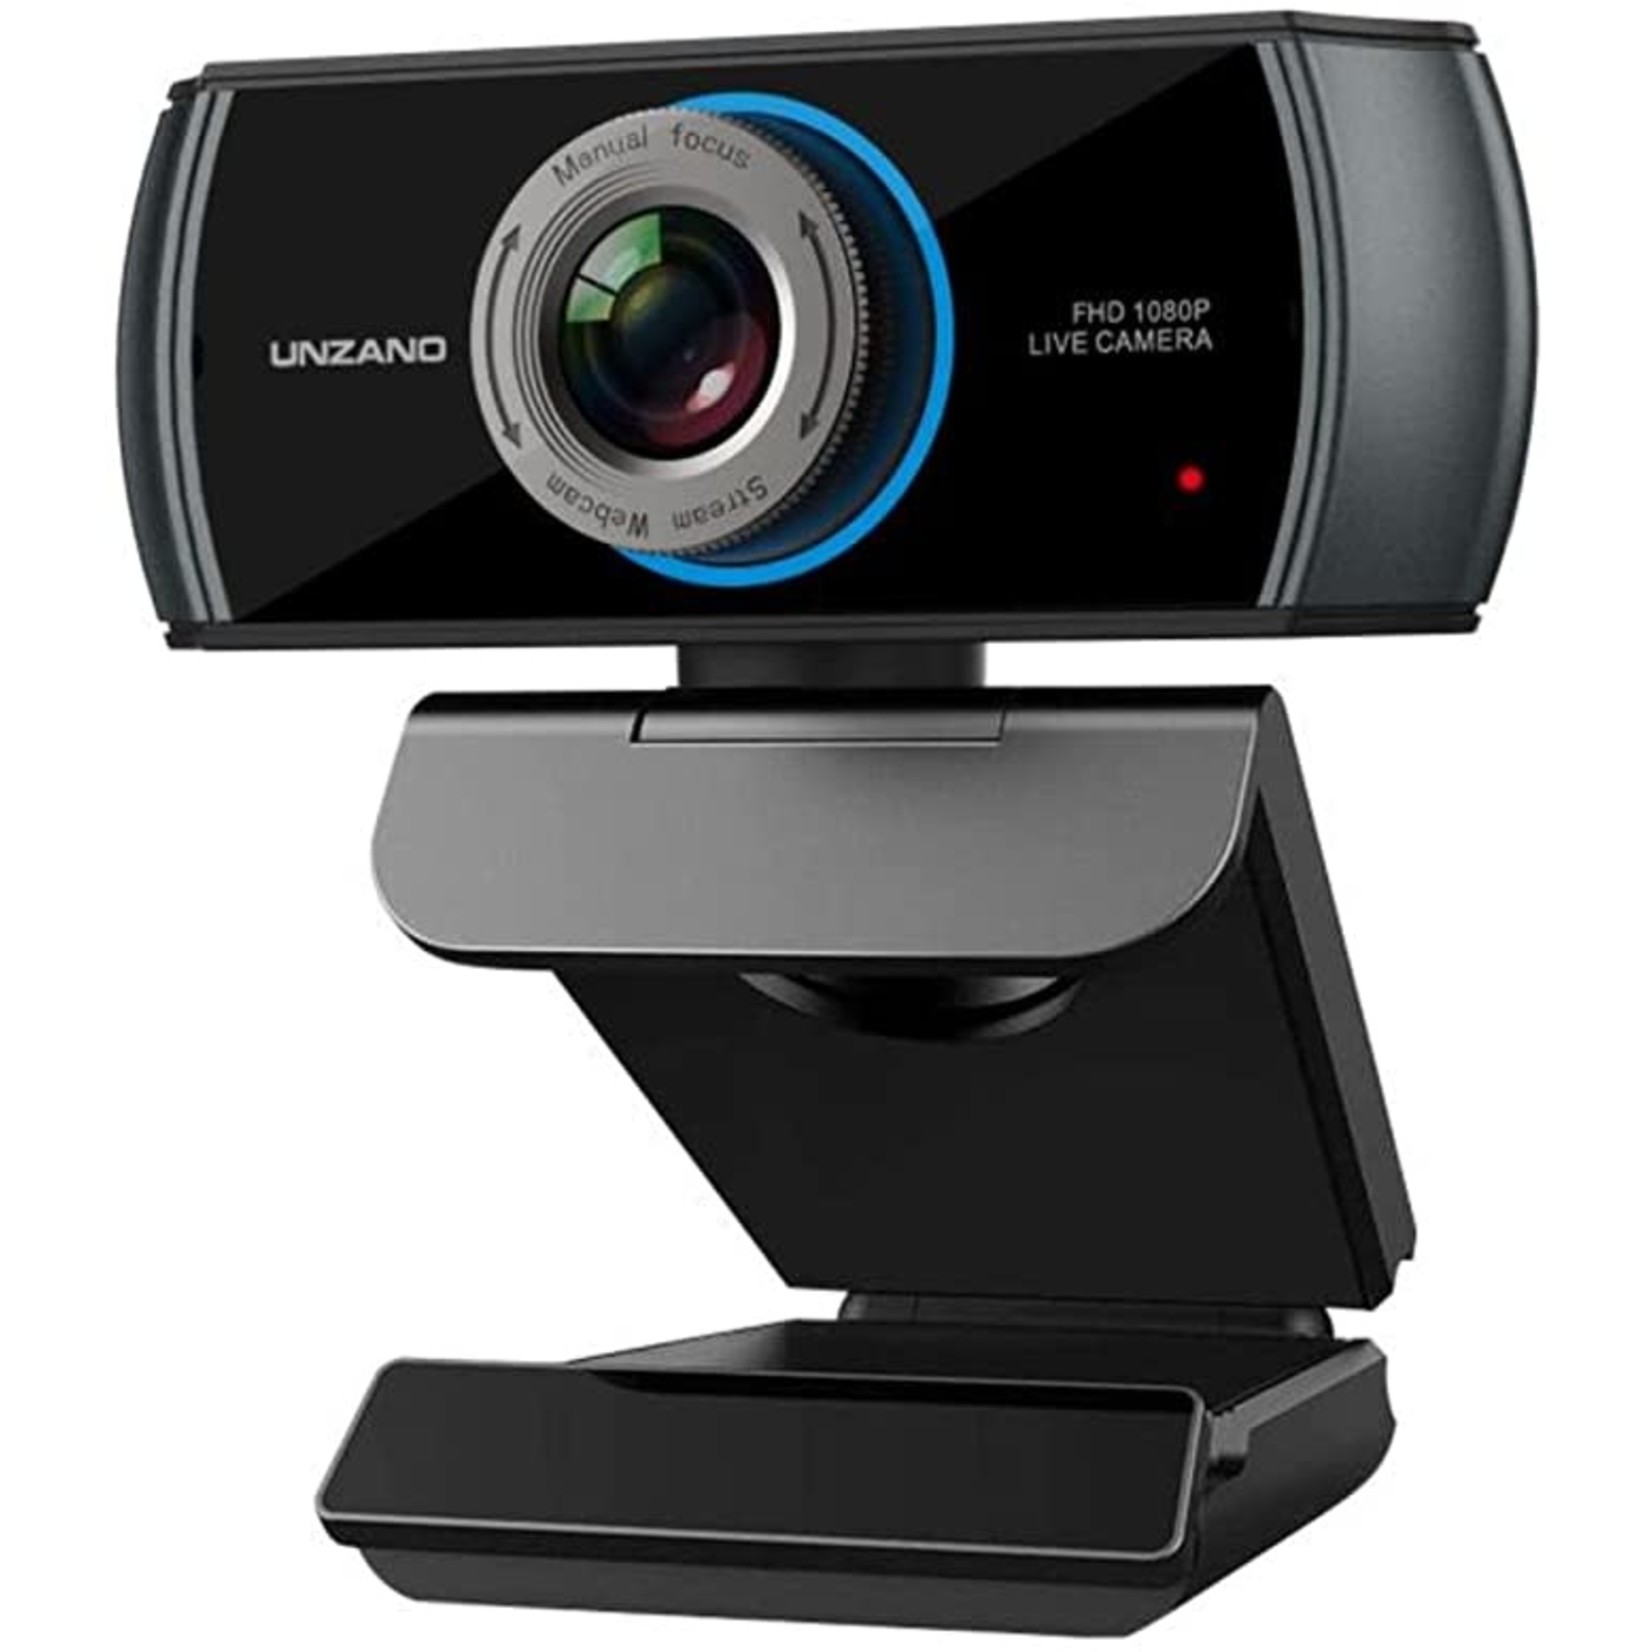 Full HD Webcam 1080P/1536P, Widescreen Video Calling and Recording, Digital Web Camera with Microphone, Stream Cam for PC, Laptops and Desktop